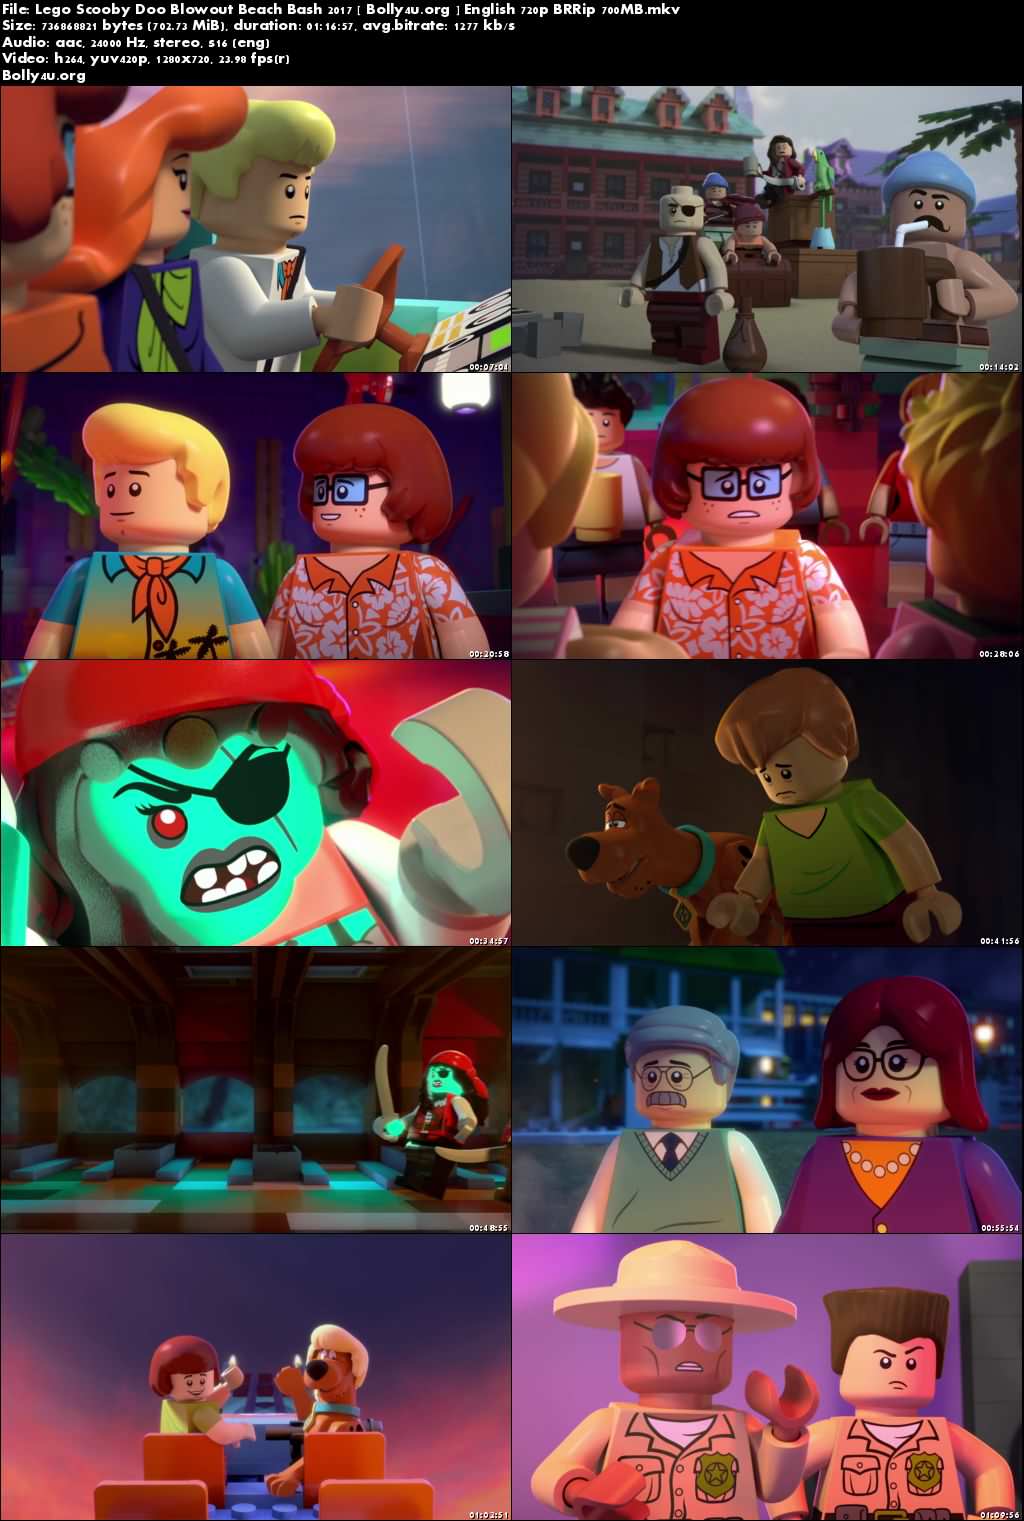 Lego Scooby Doo Blowout Beach Bash 2017 BRRip 250MB English 480p Download